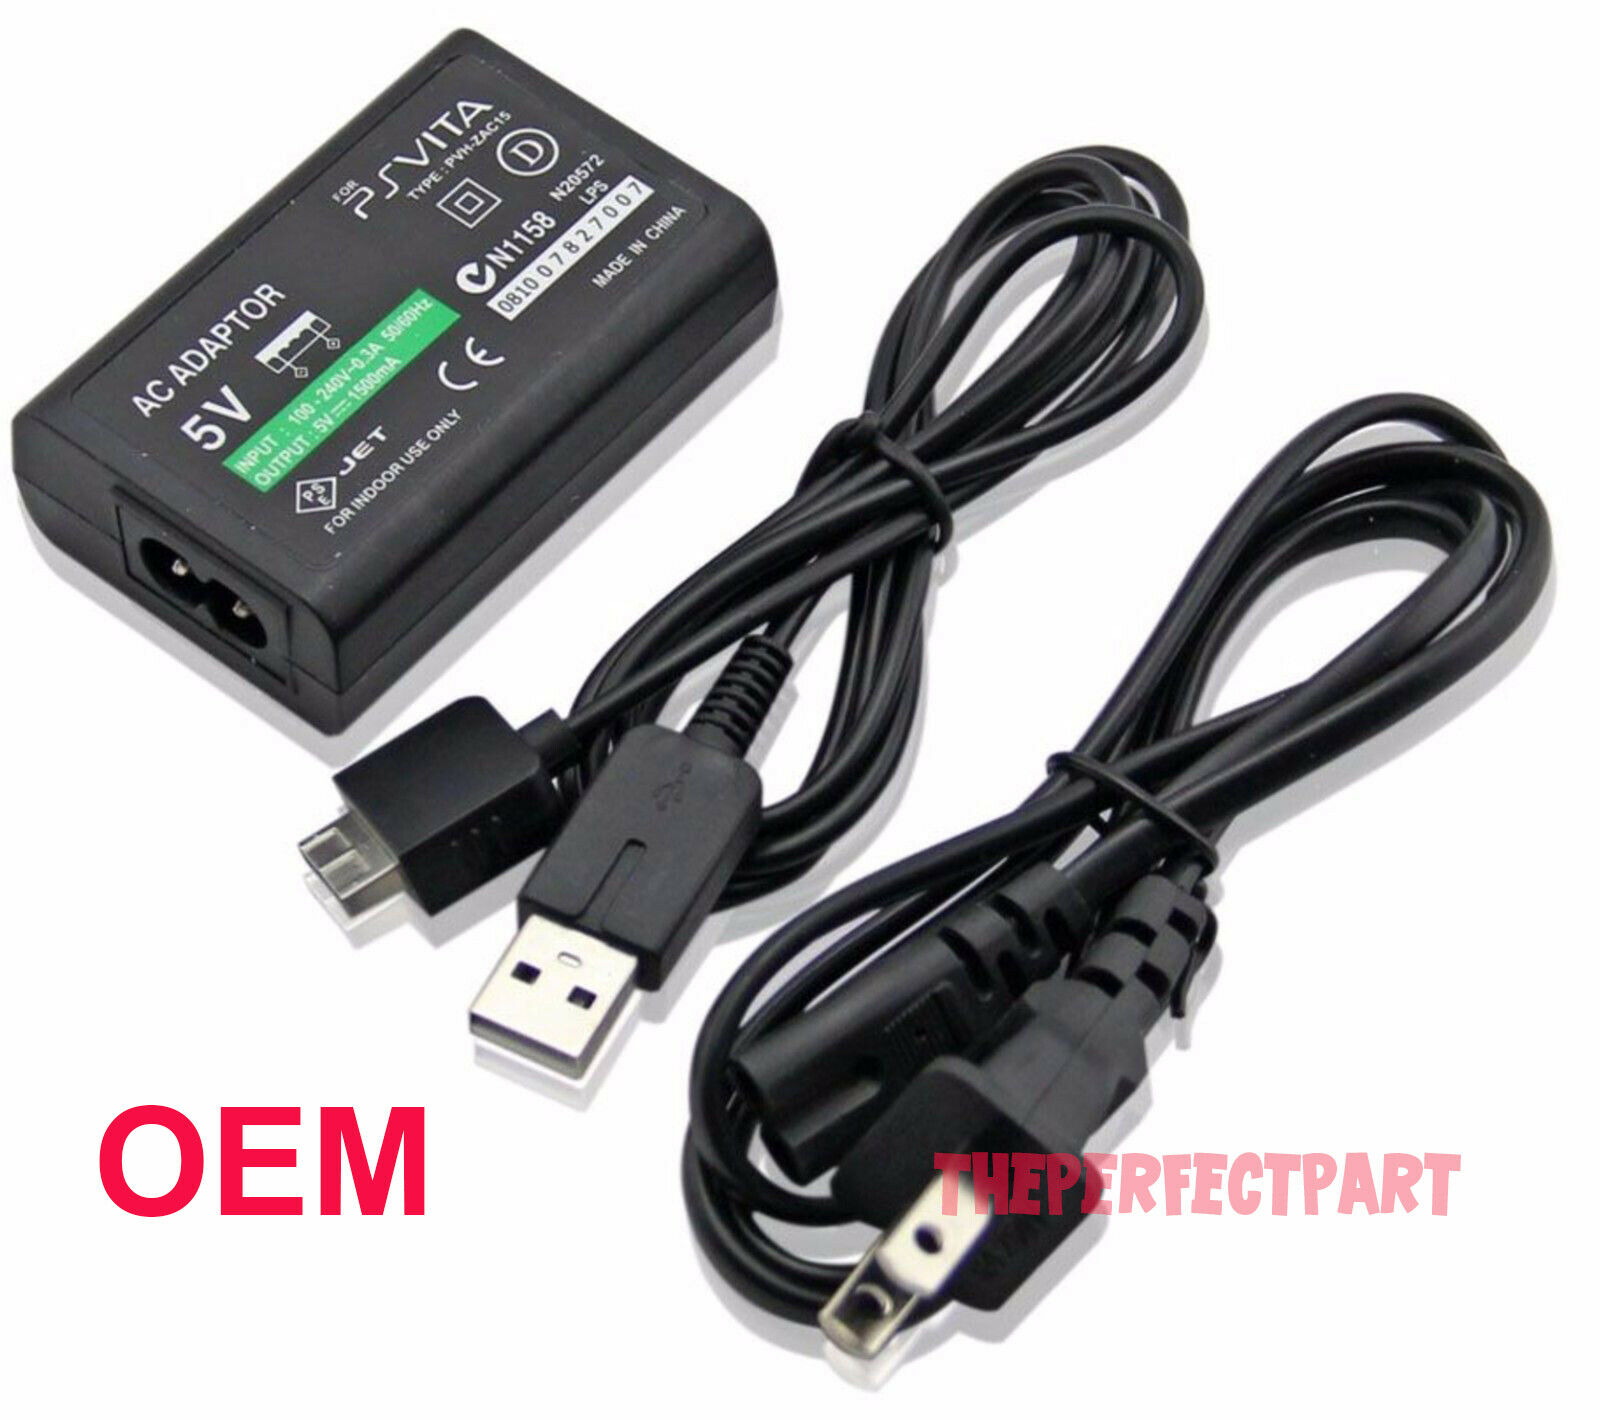 5v 1500ma PS Vita - PCH-1000 AC Adapter Power Supply USB Data Cable For Sony PS Vita PSV Home Wall